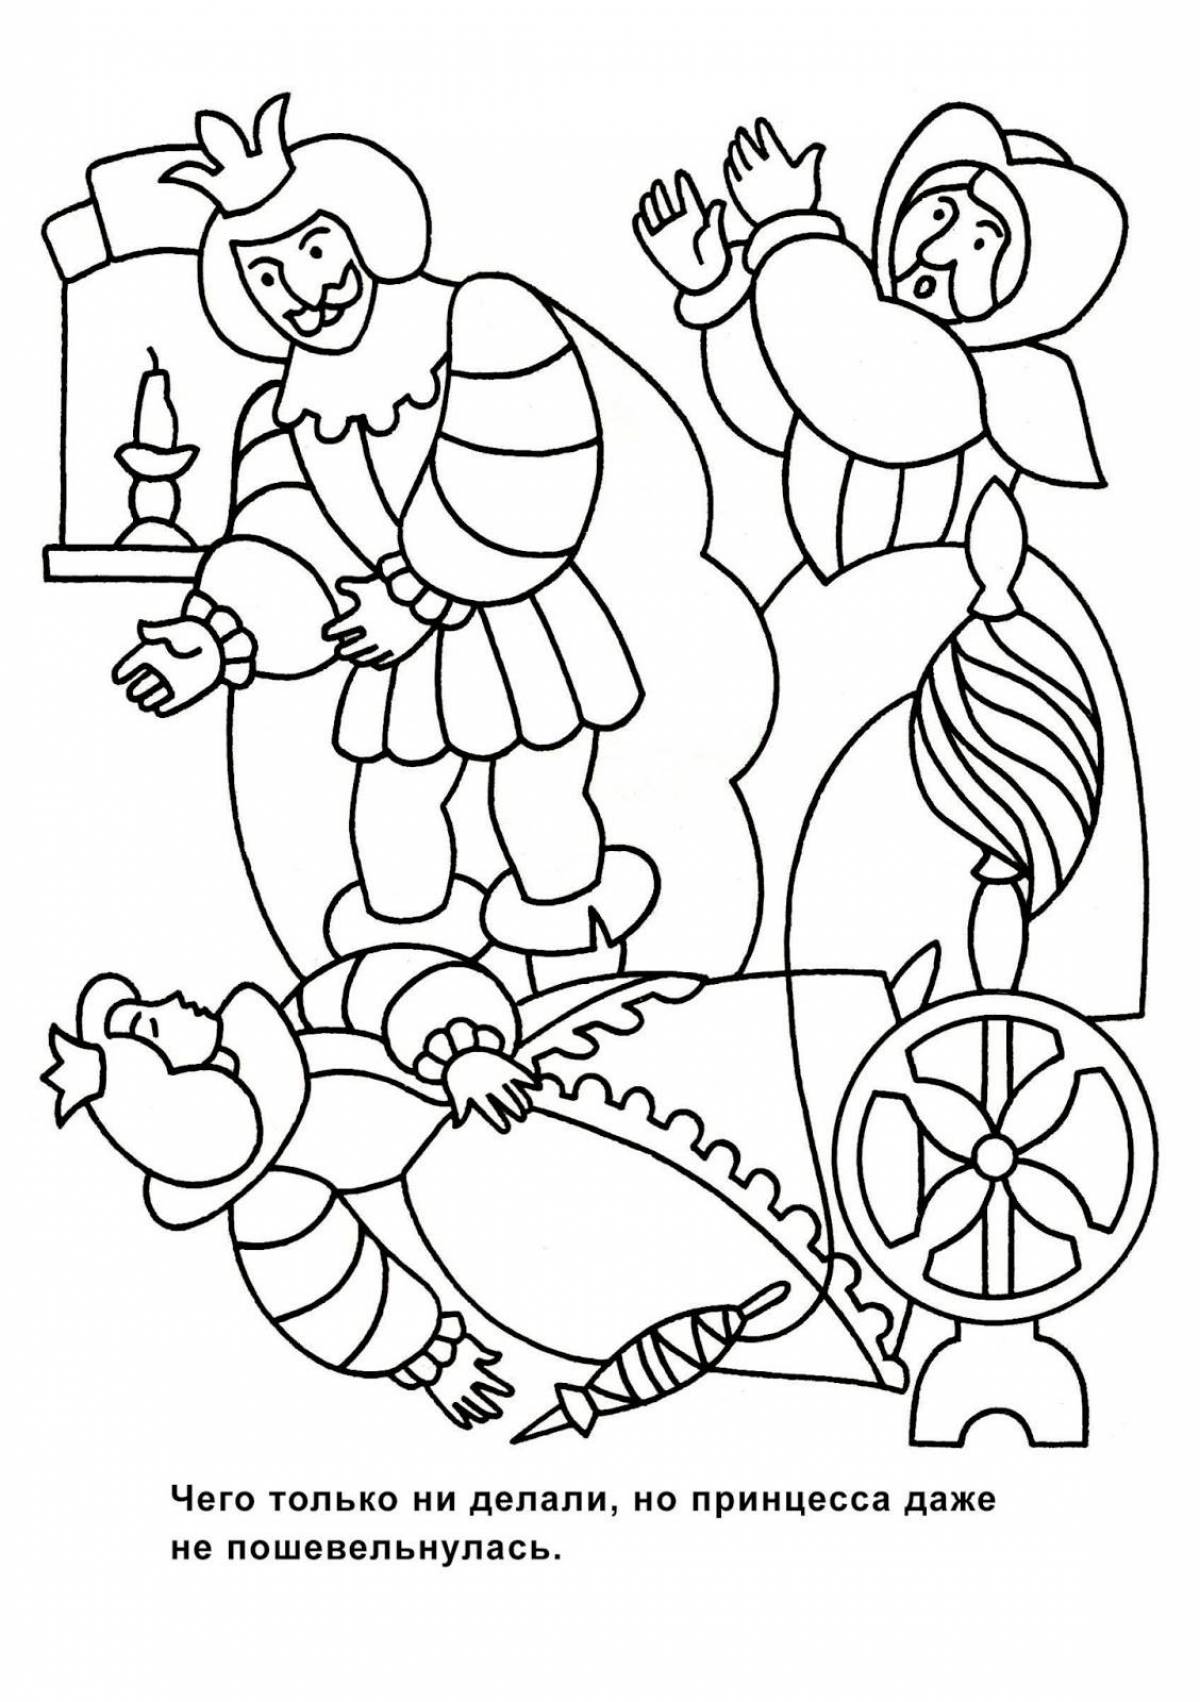 Funny coloring pages with the fairy tales of Charles Perrault